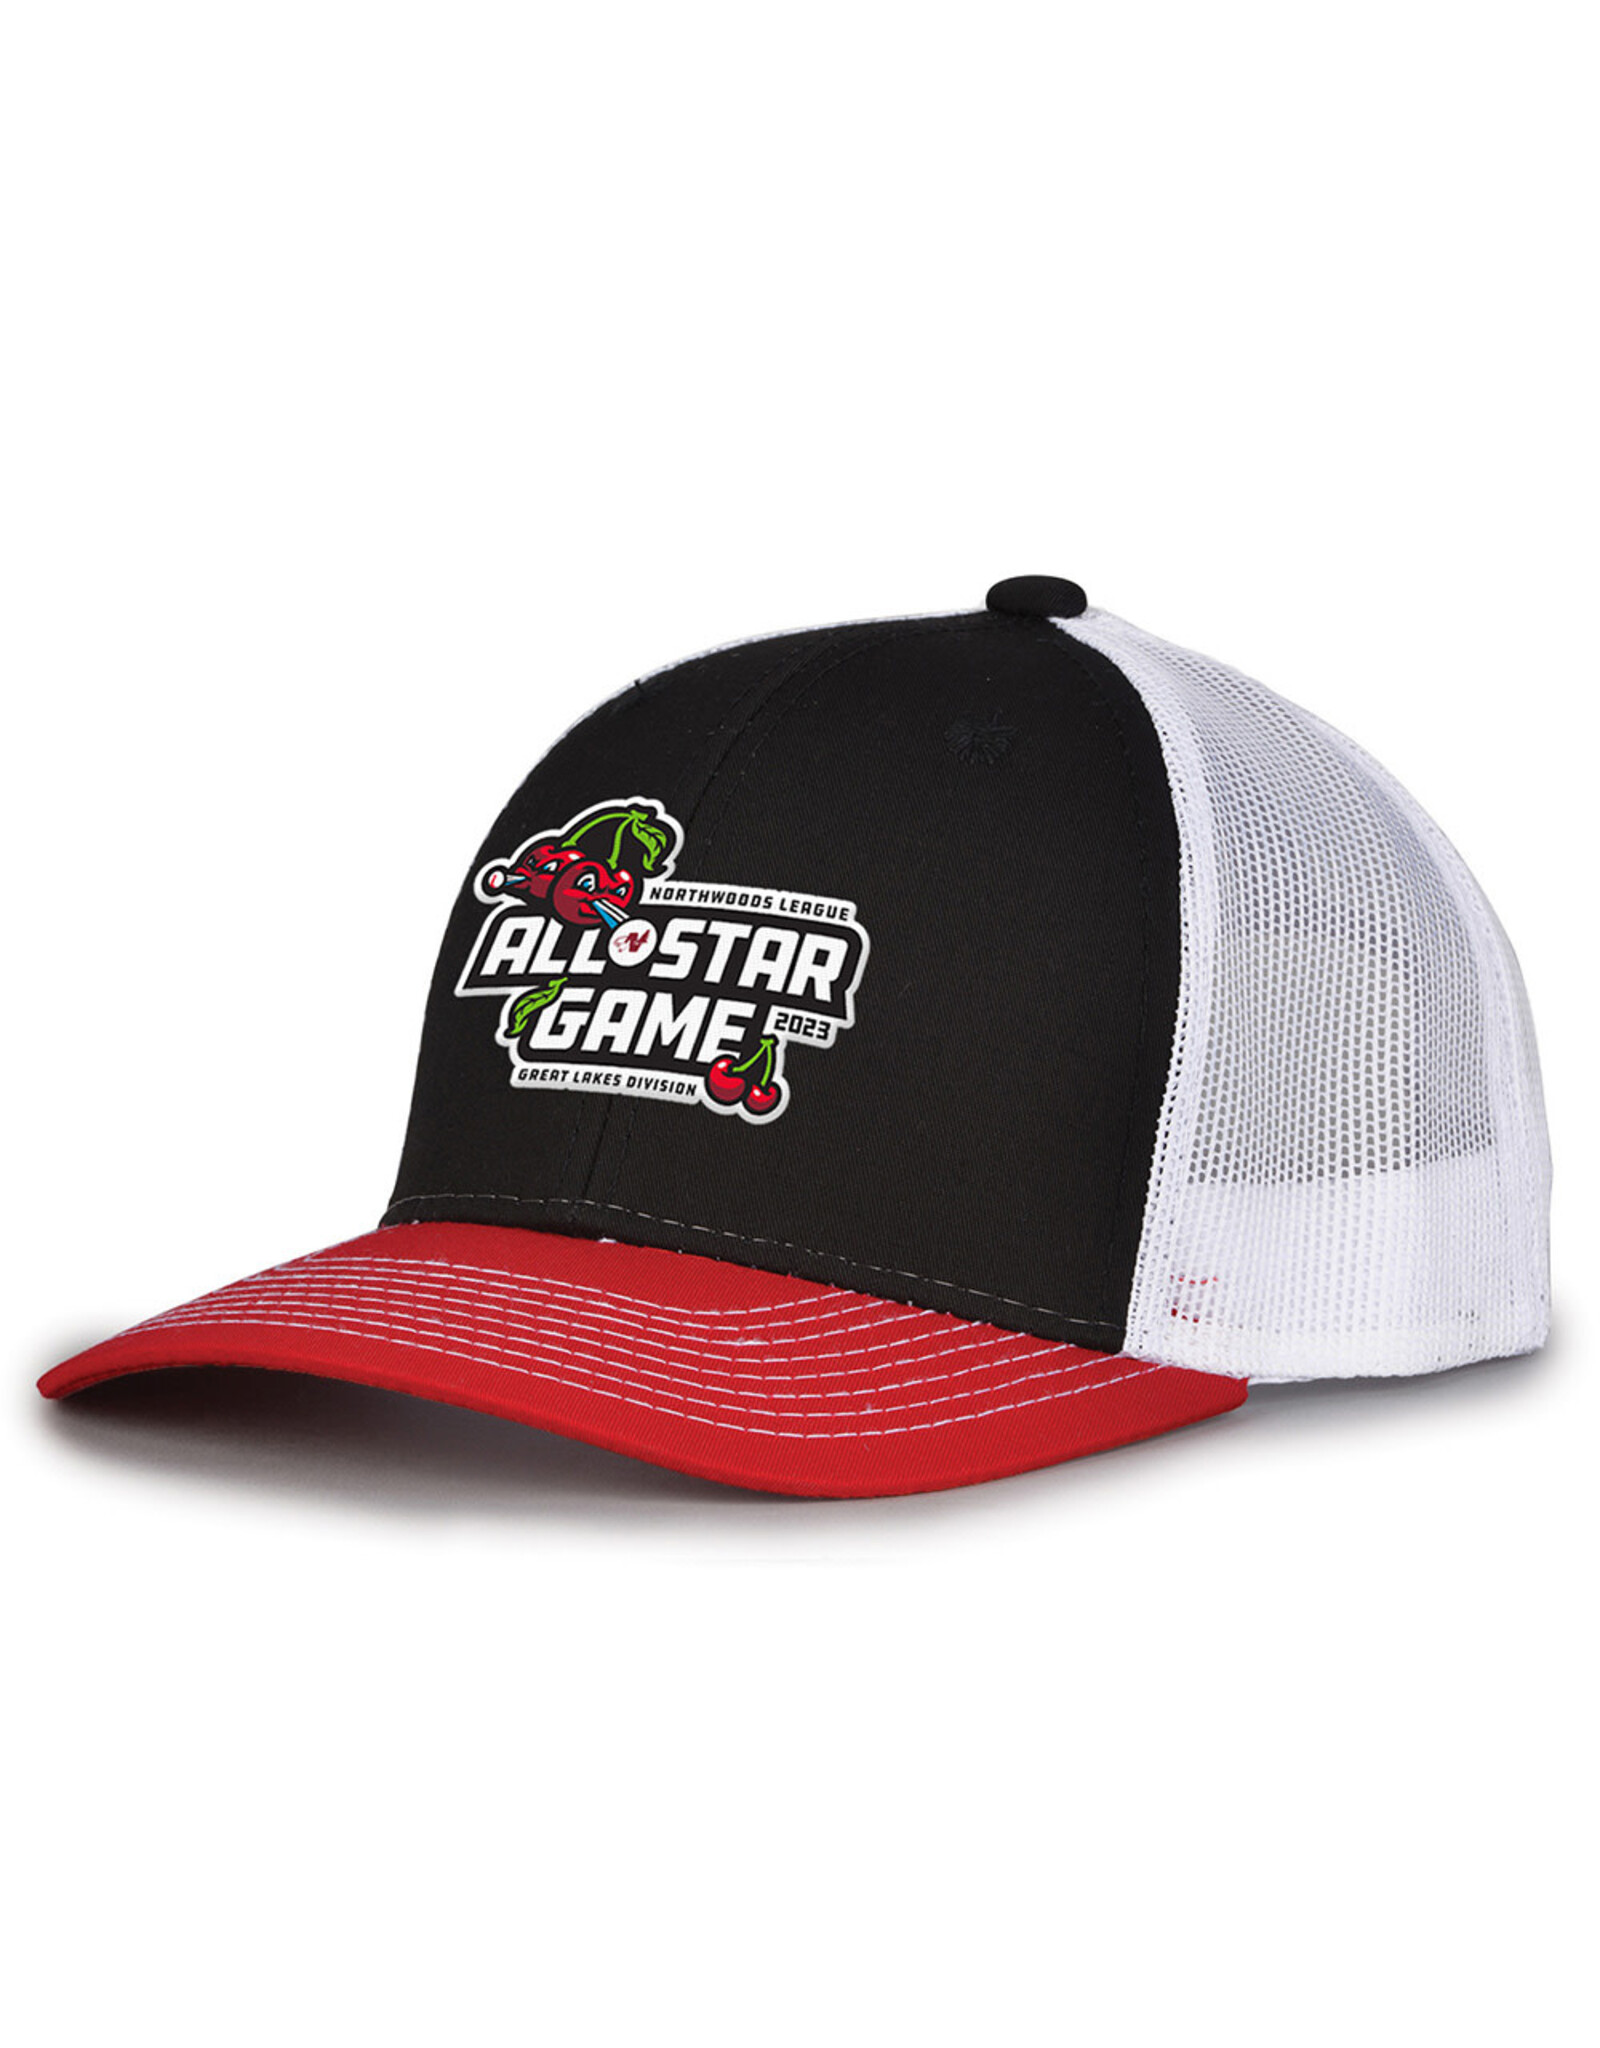 The Game 2023 Northwoods League All-Star Game Black/Red/White Trucker Cap